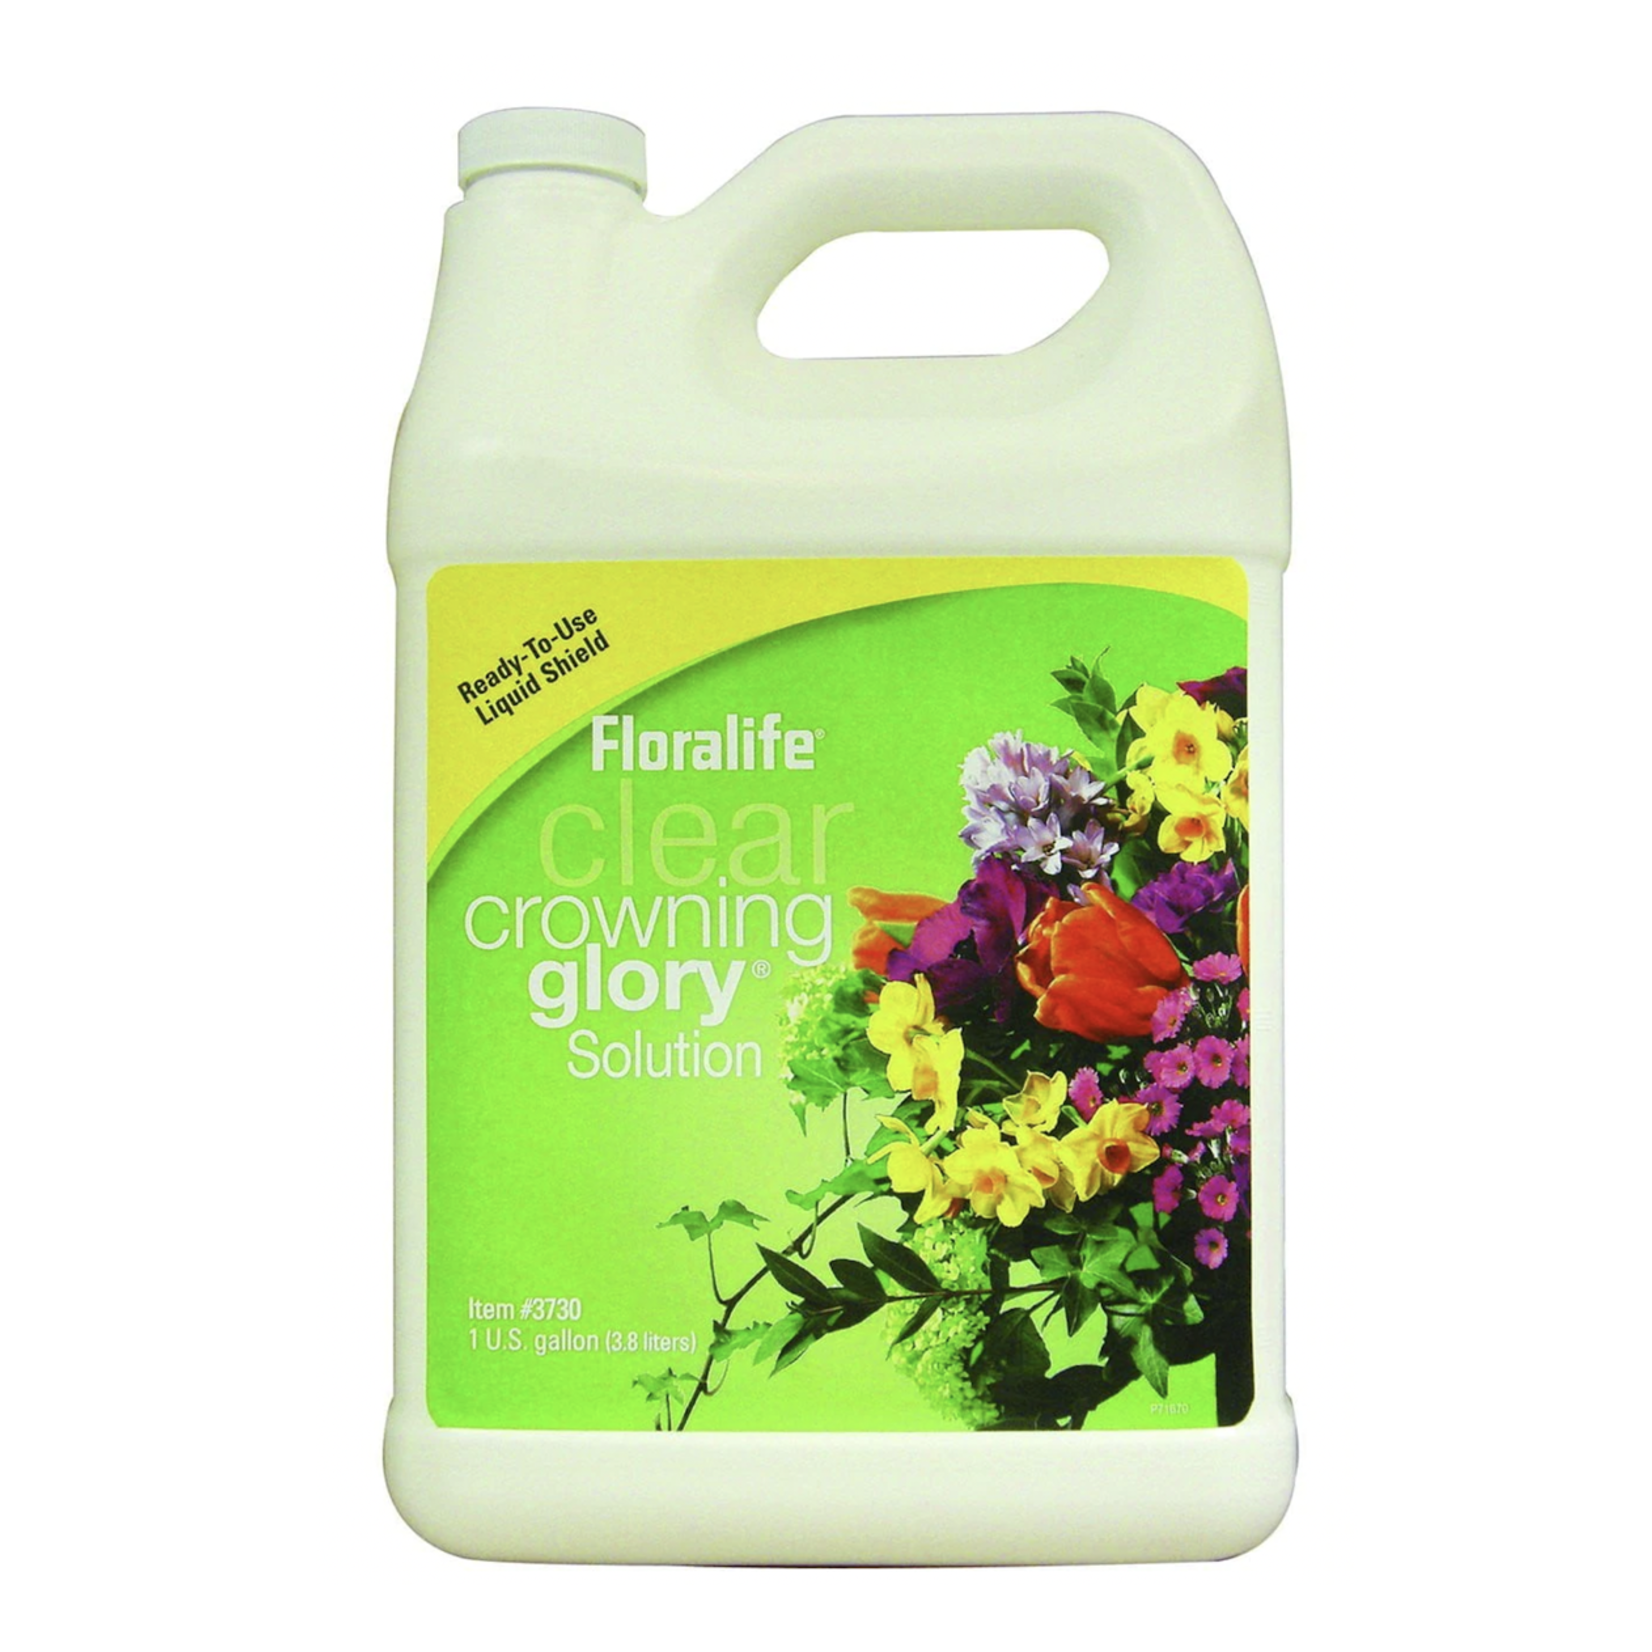 Floralife Crowning Glory Solution, 1 gal